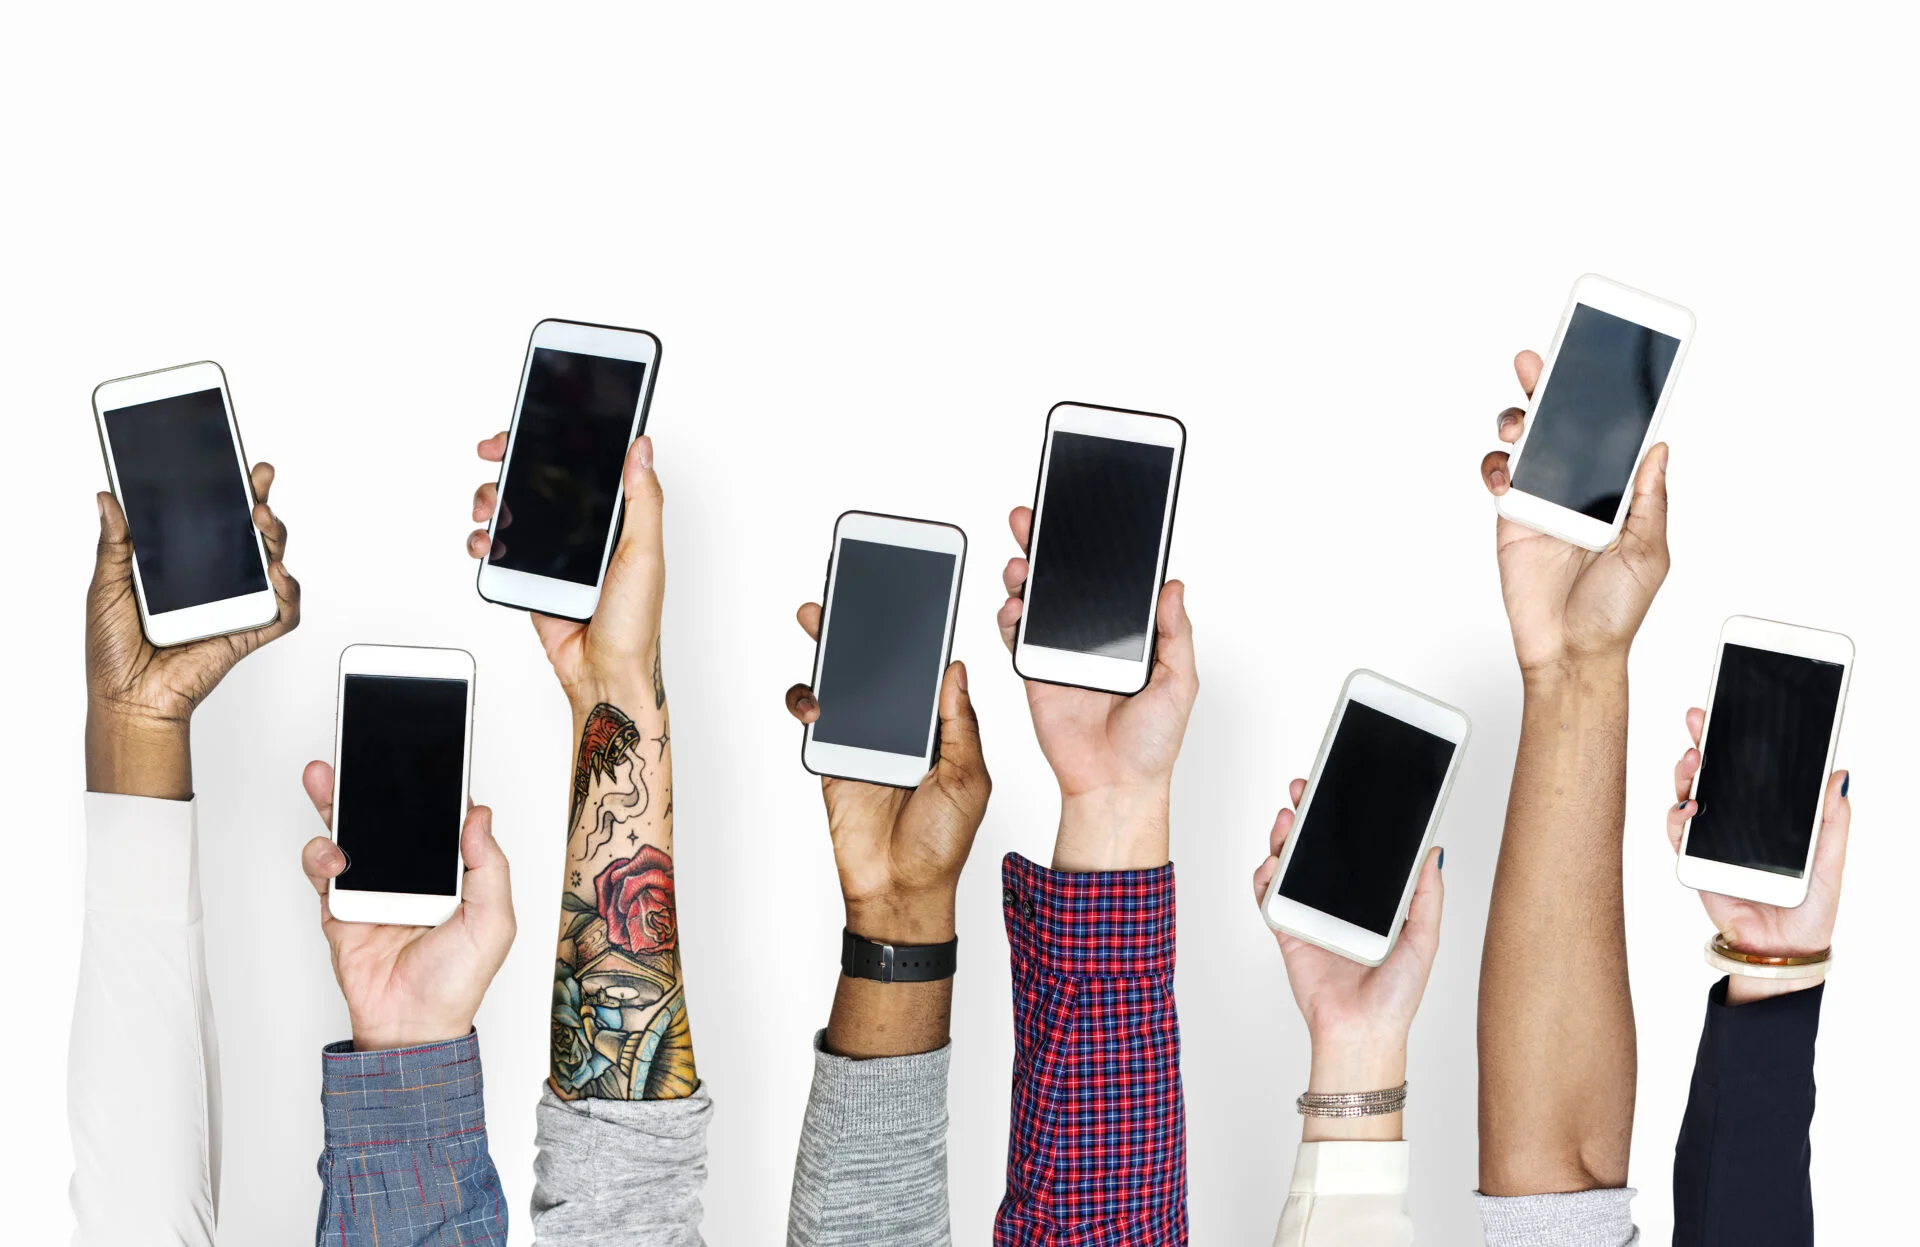 People holding up their mobile phones against a white background